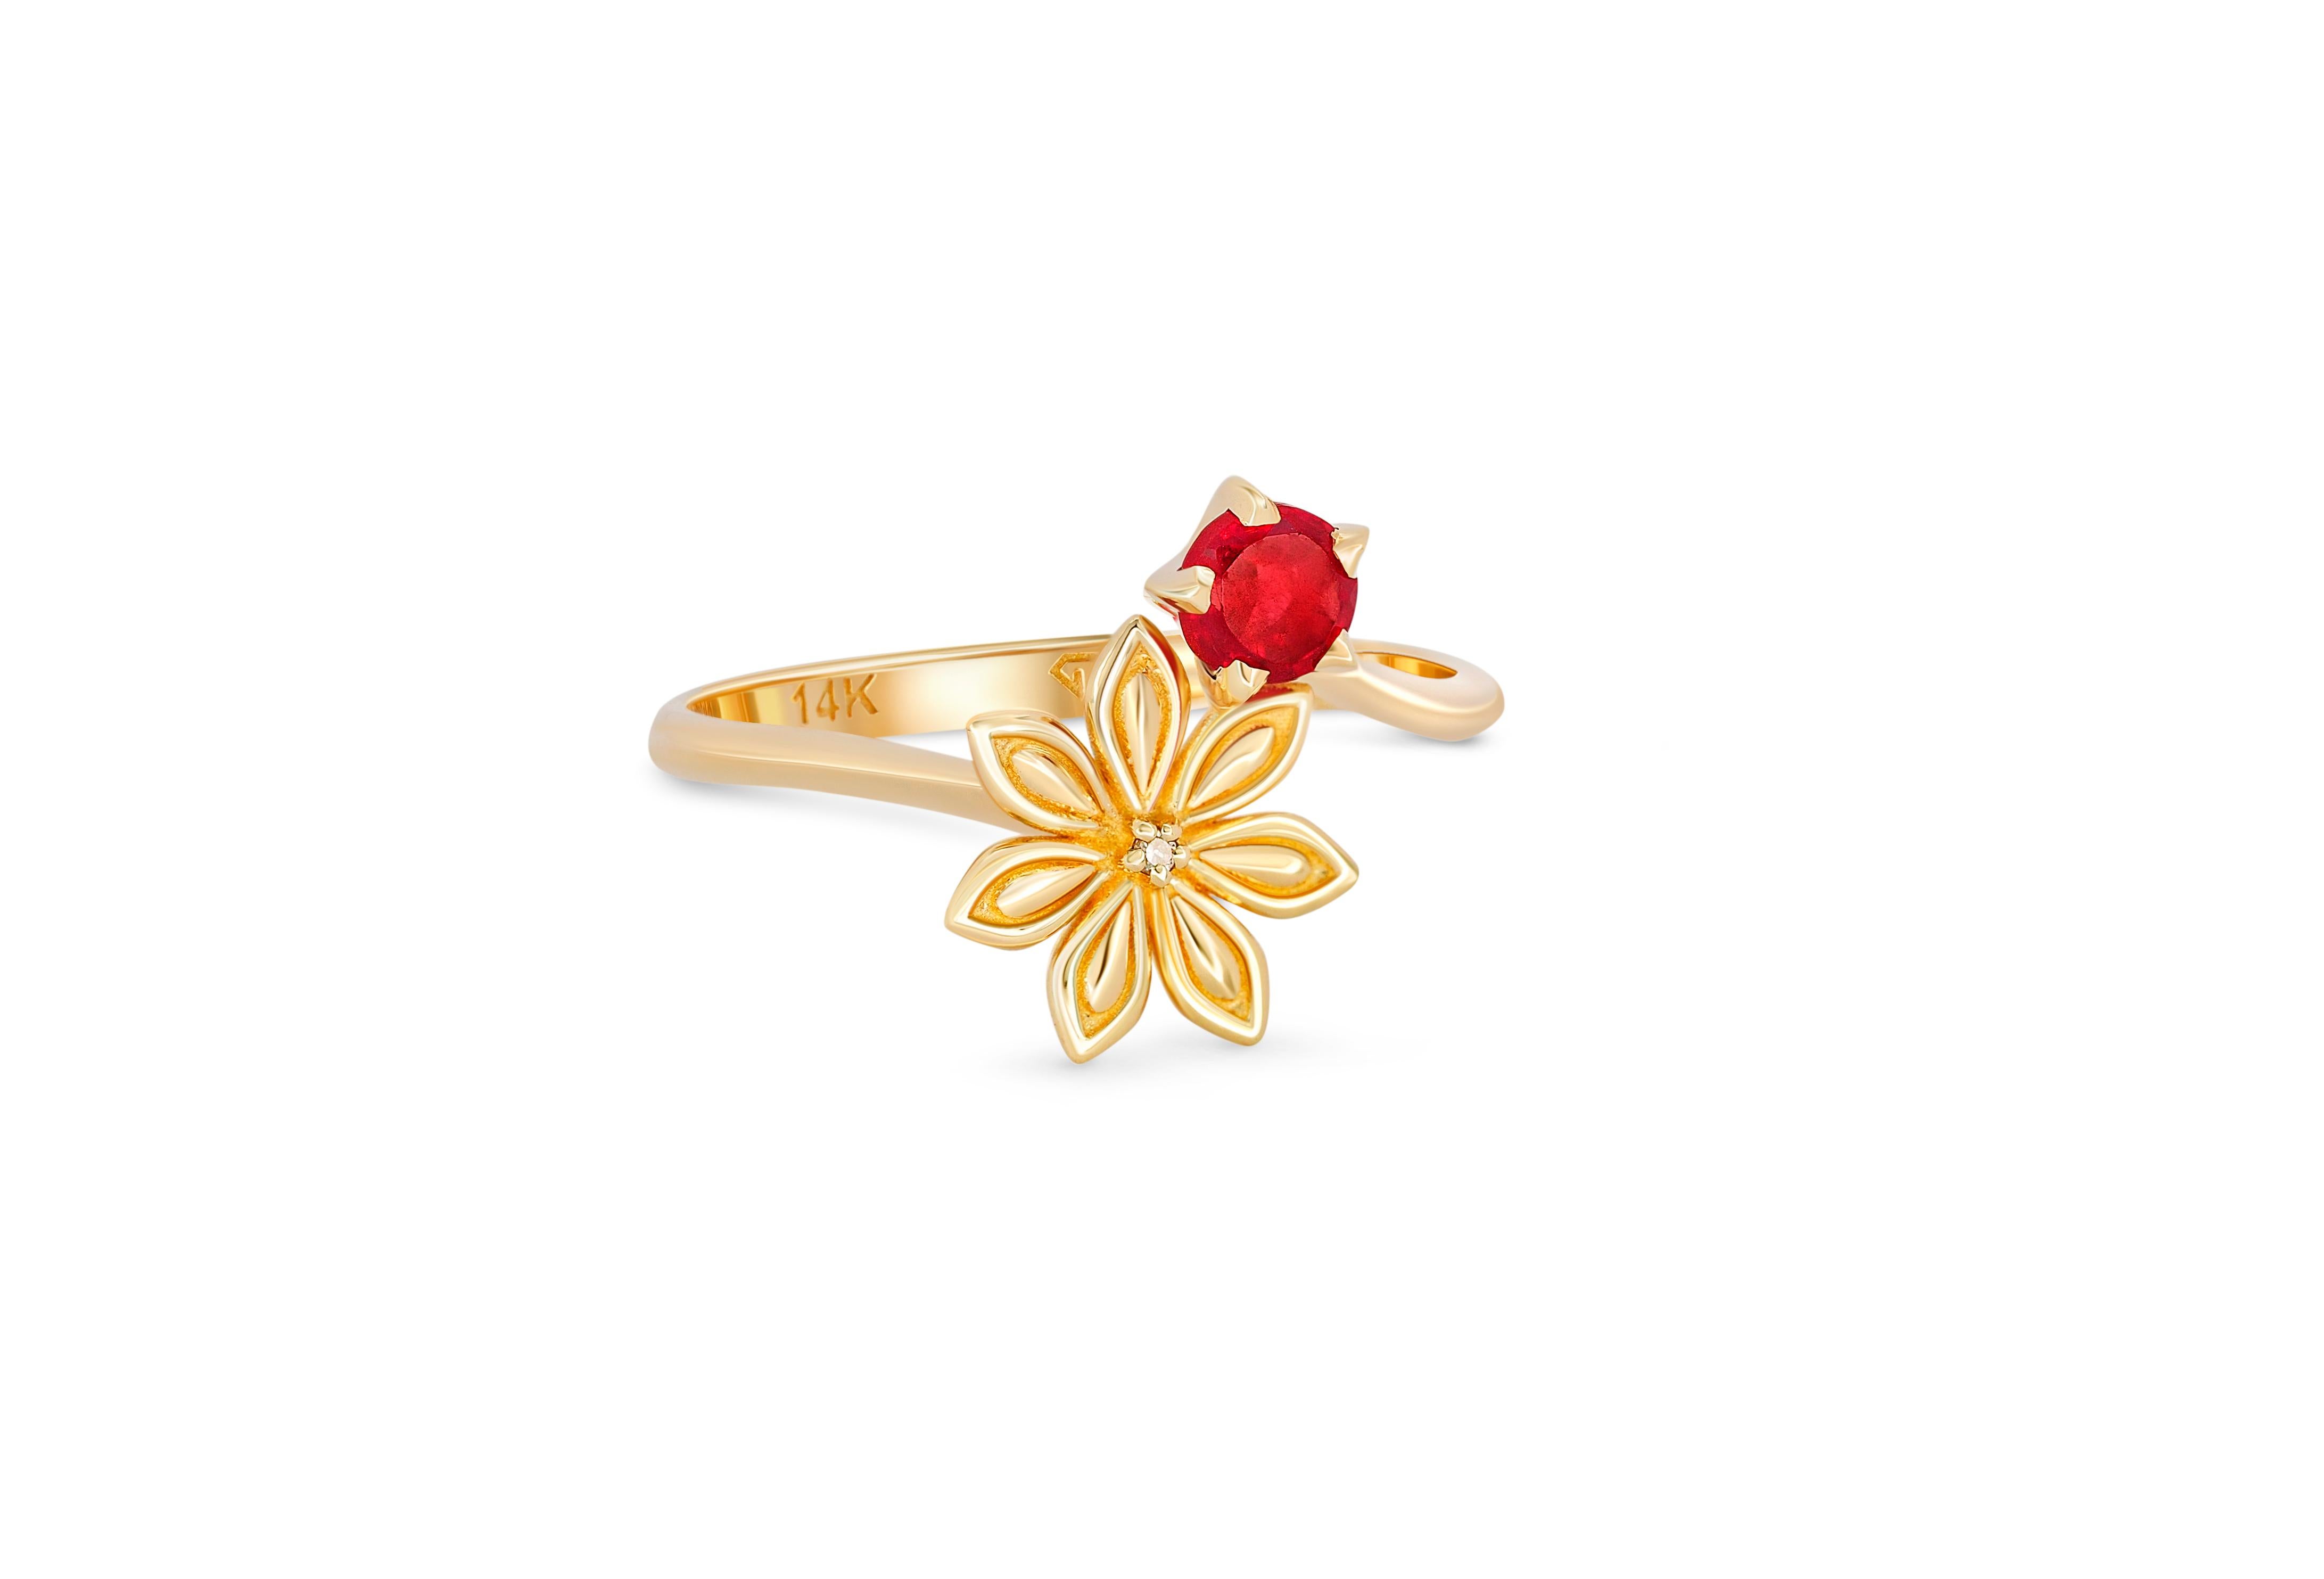 Women's Star Anise Flower Jewelry set: ring and earrings in 14k gold. For Sale